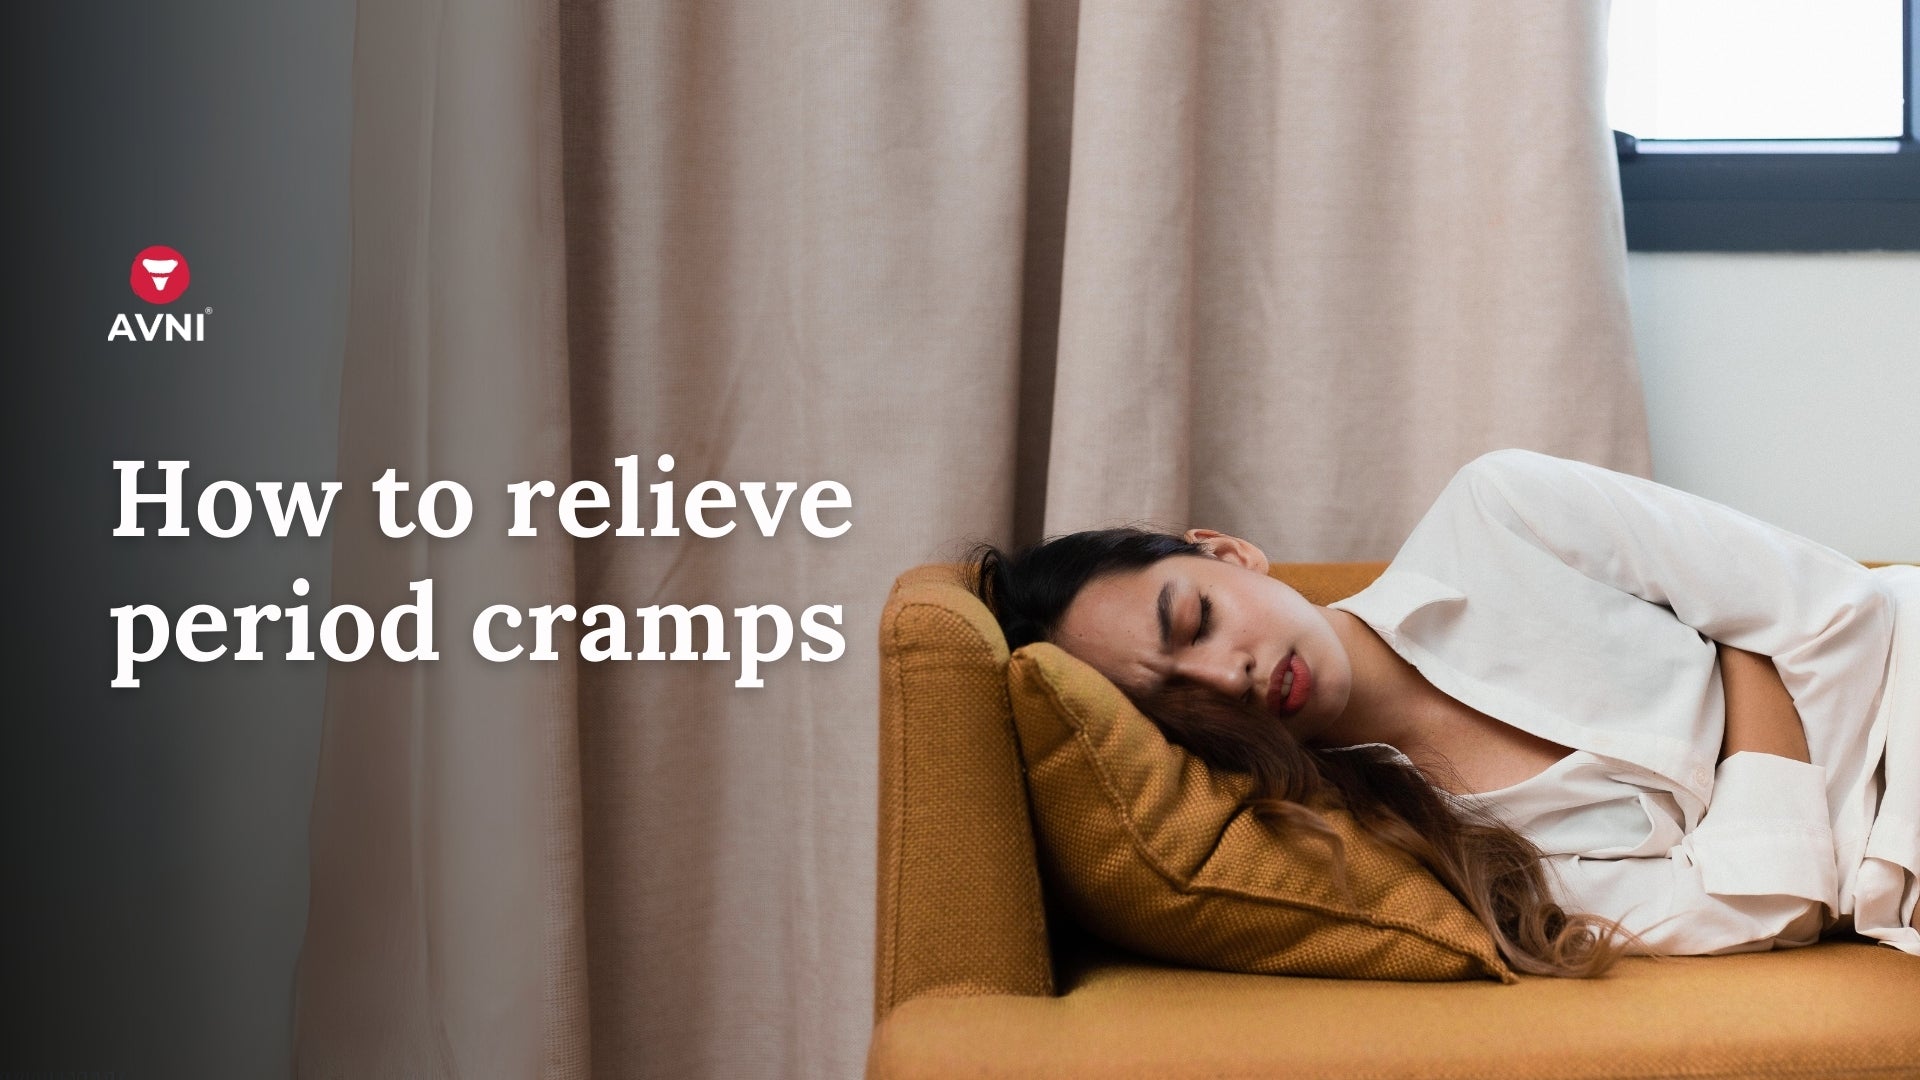 How to stop or manage heavy periods: Treatment and home remedies